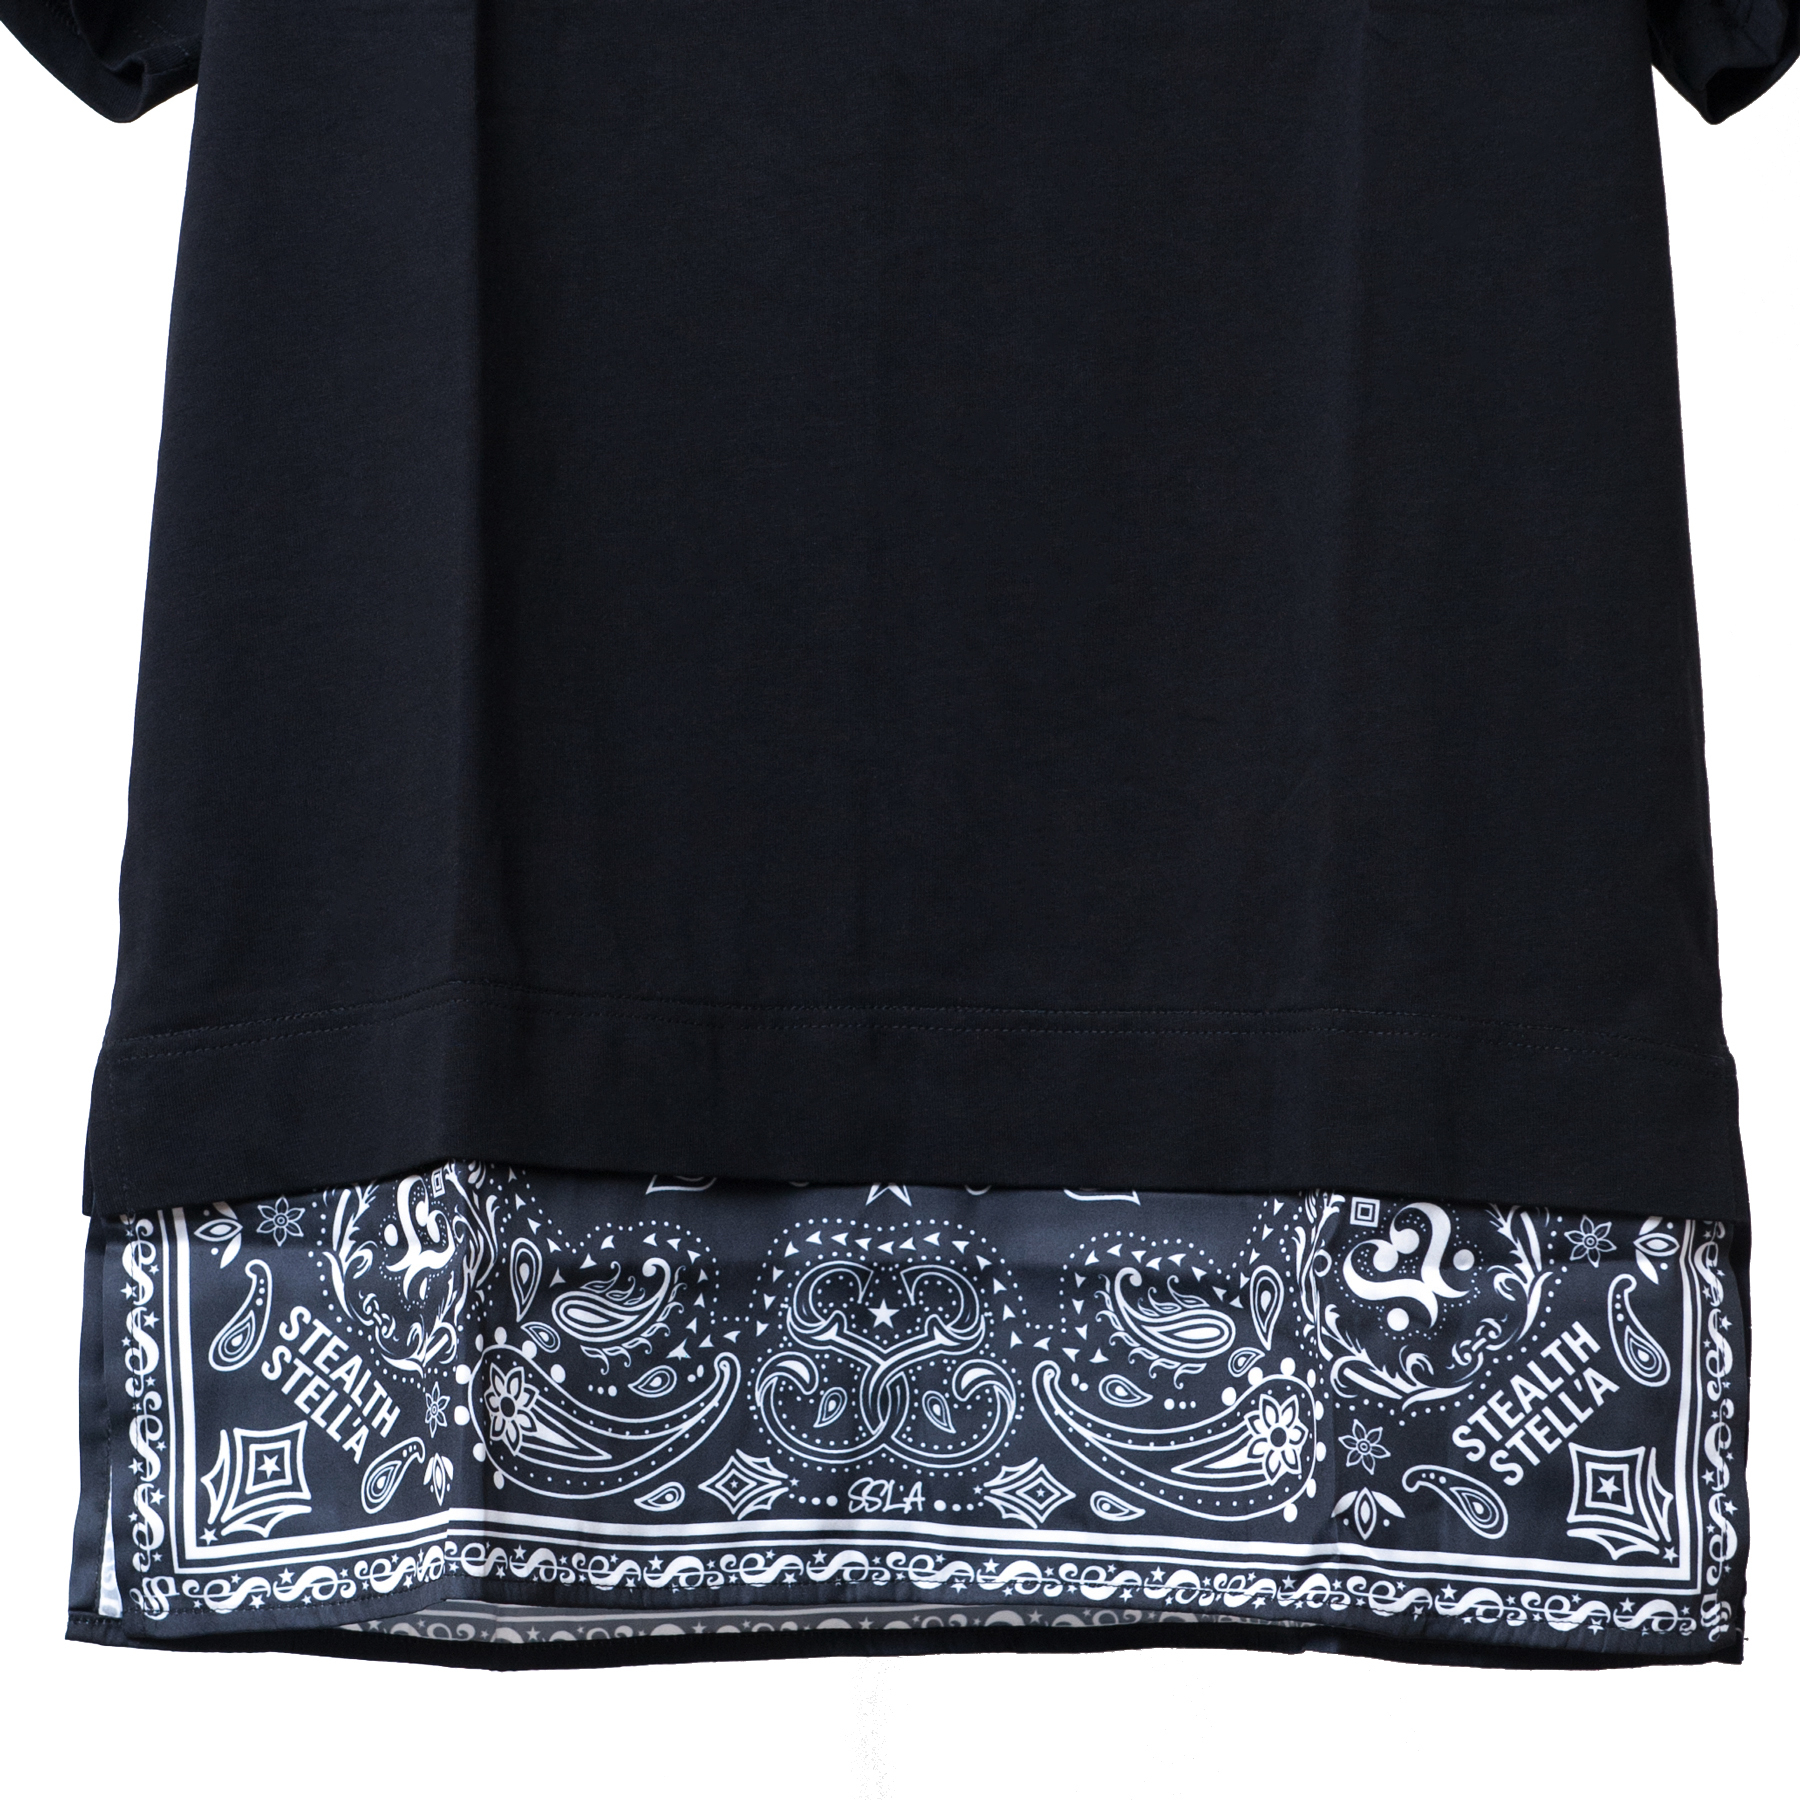 【STEALTH STELL'A】APRON-T'S（BLACK）